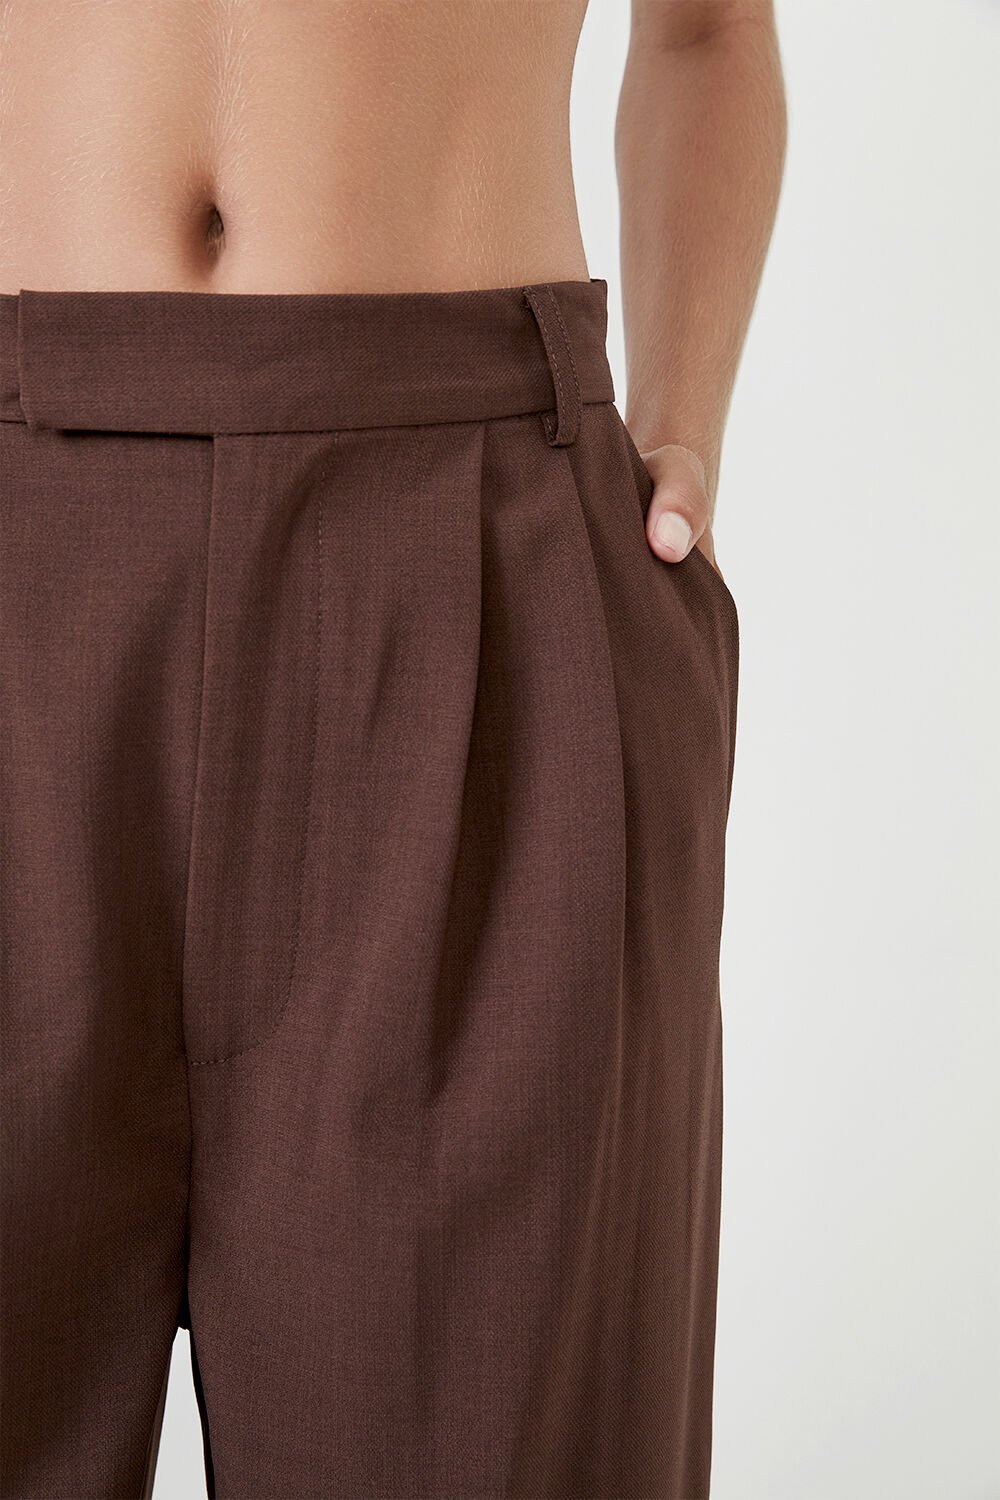 TUCK FRONT TROUSER  in colour BITTER CHOCOLATE